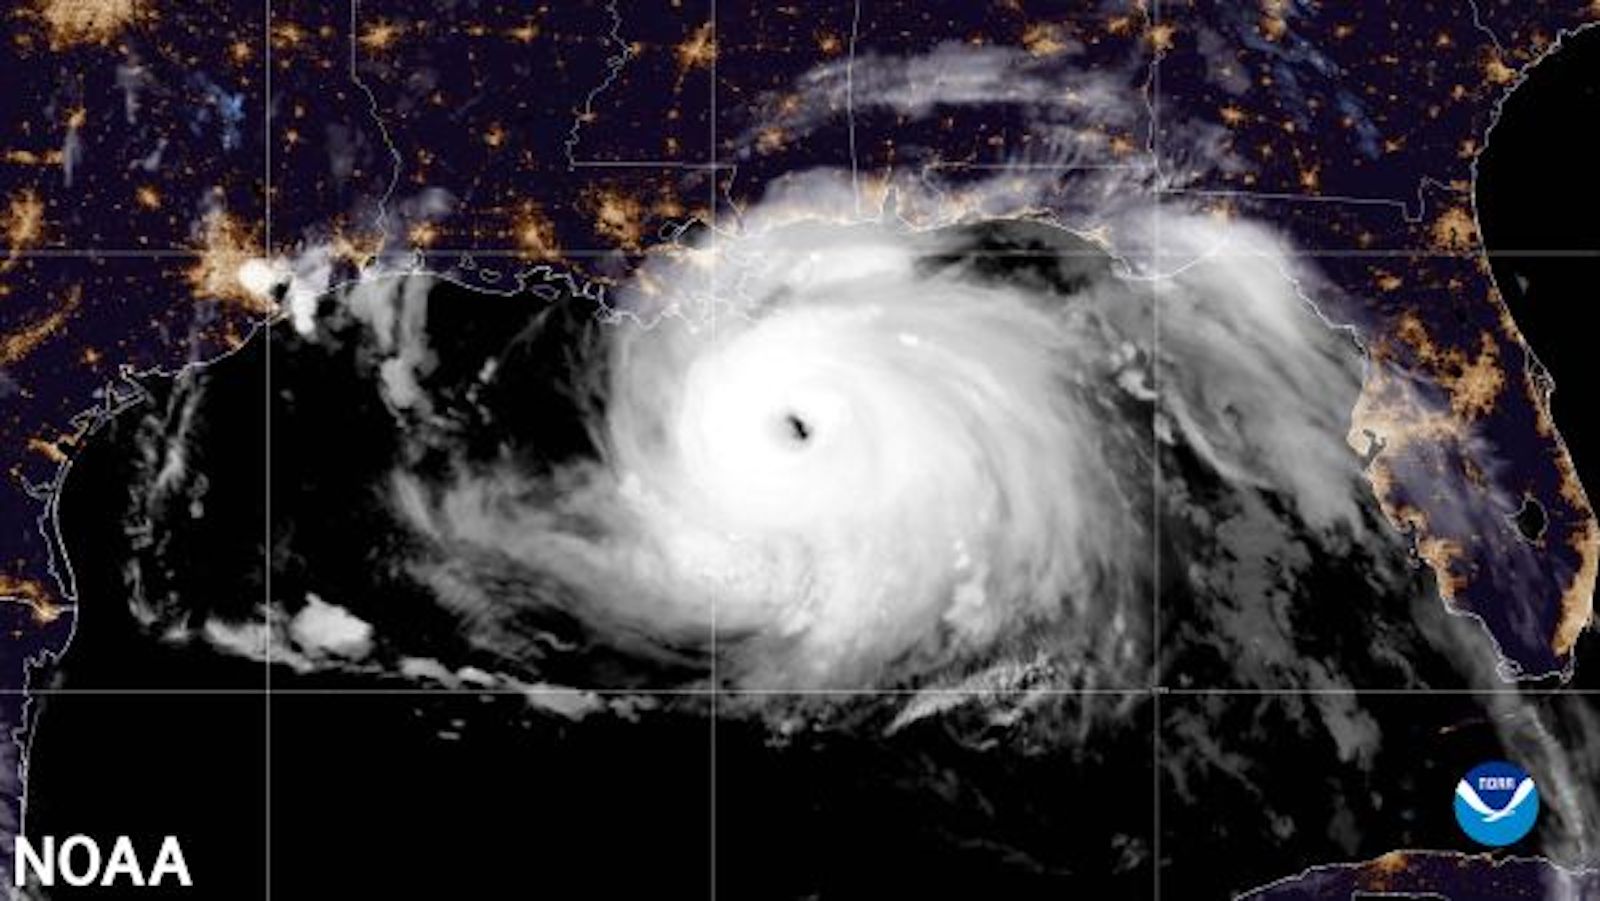 A visible satellite image of Hurricane Ida approaching land in the Gulf of Mexico, taken by NOAA's GOES-16 (GOES East) satellite at 4:10 a.m. EDT on August 29, 2021.